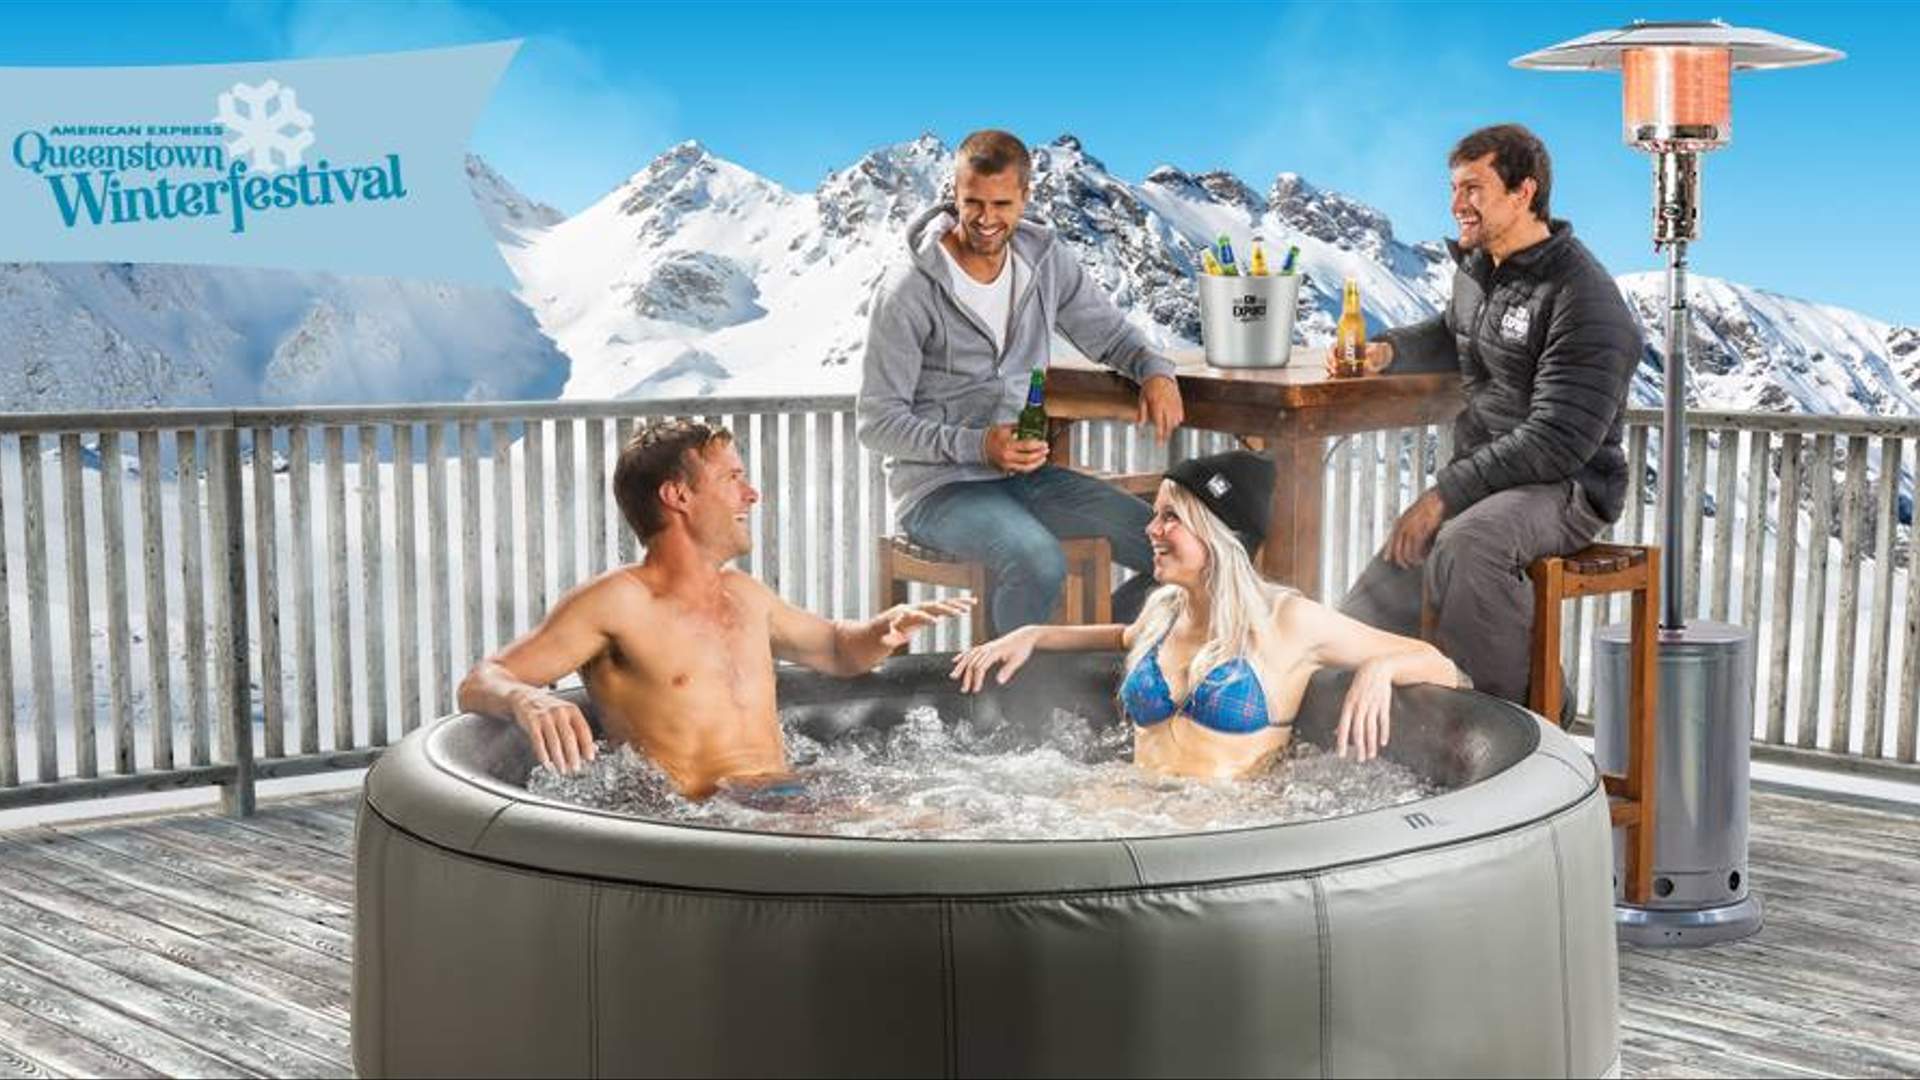 Hot Tub Cinema is Coming to Queenstown Winter Festival.